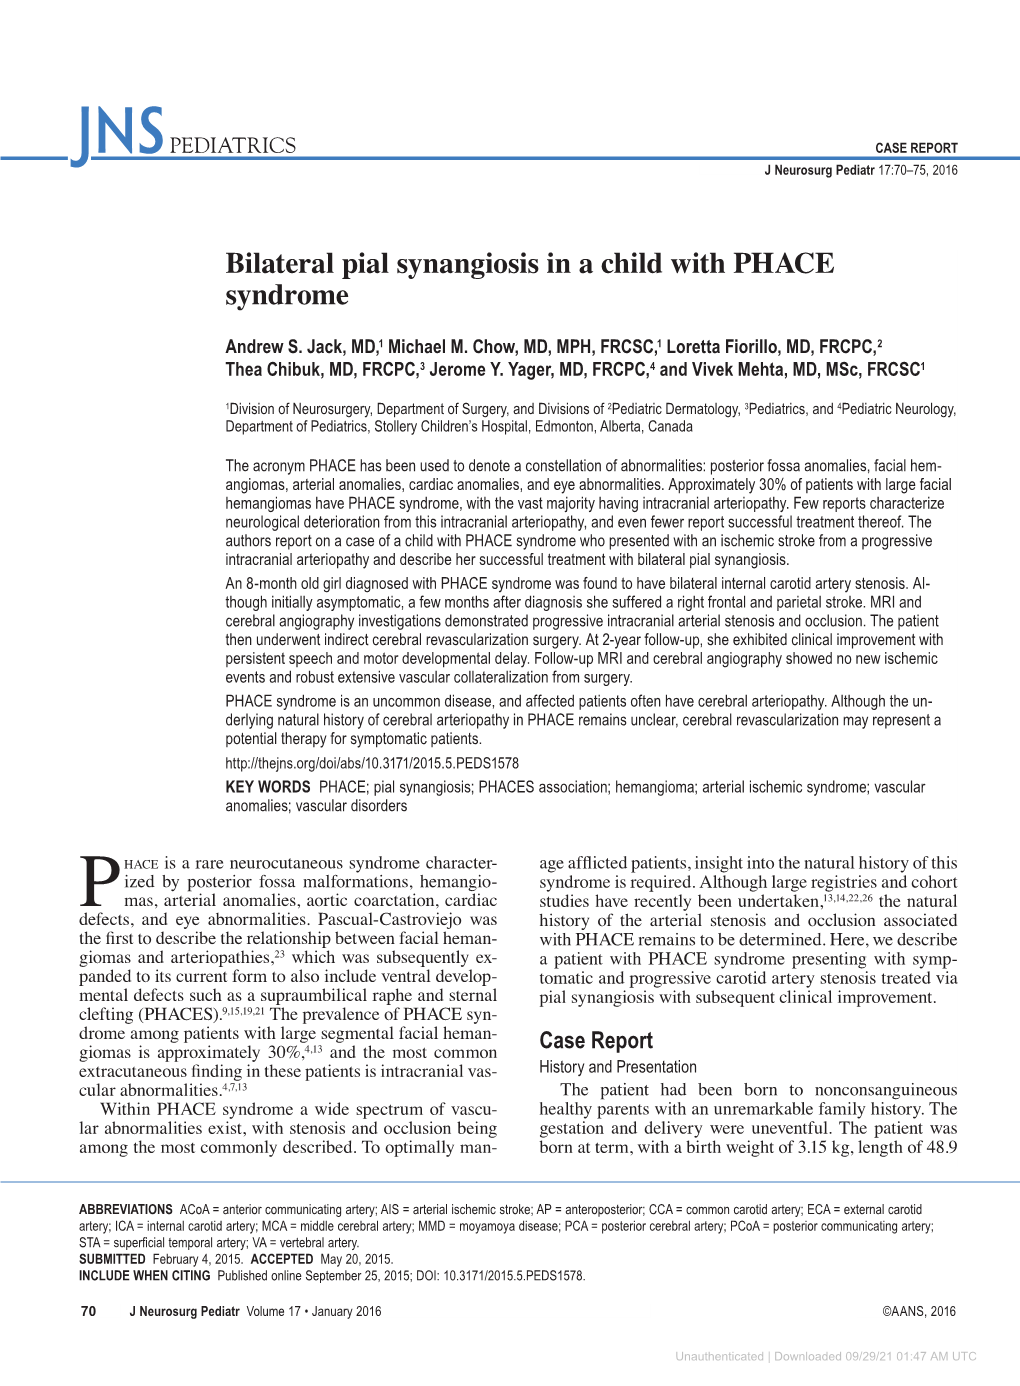 Bilateral Pial Synangiosis in a Child with PHACE Syndrome